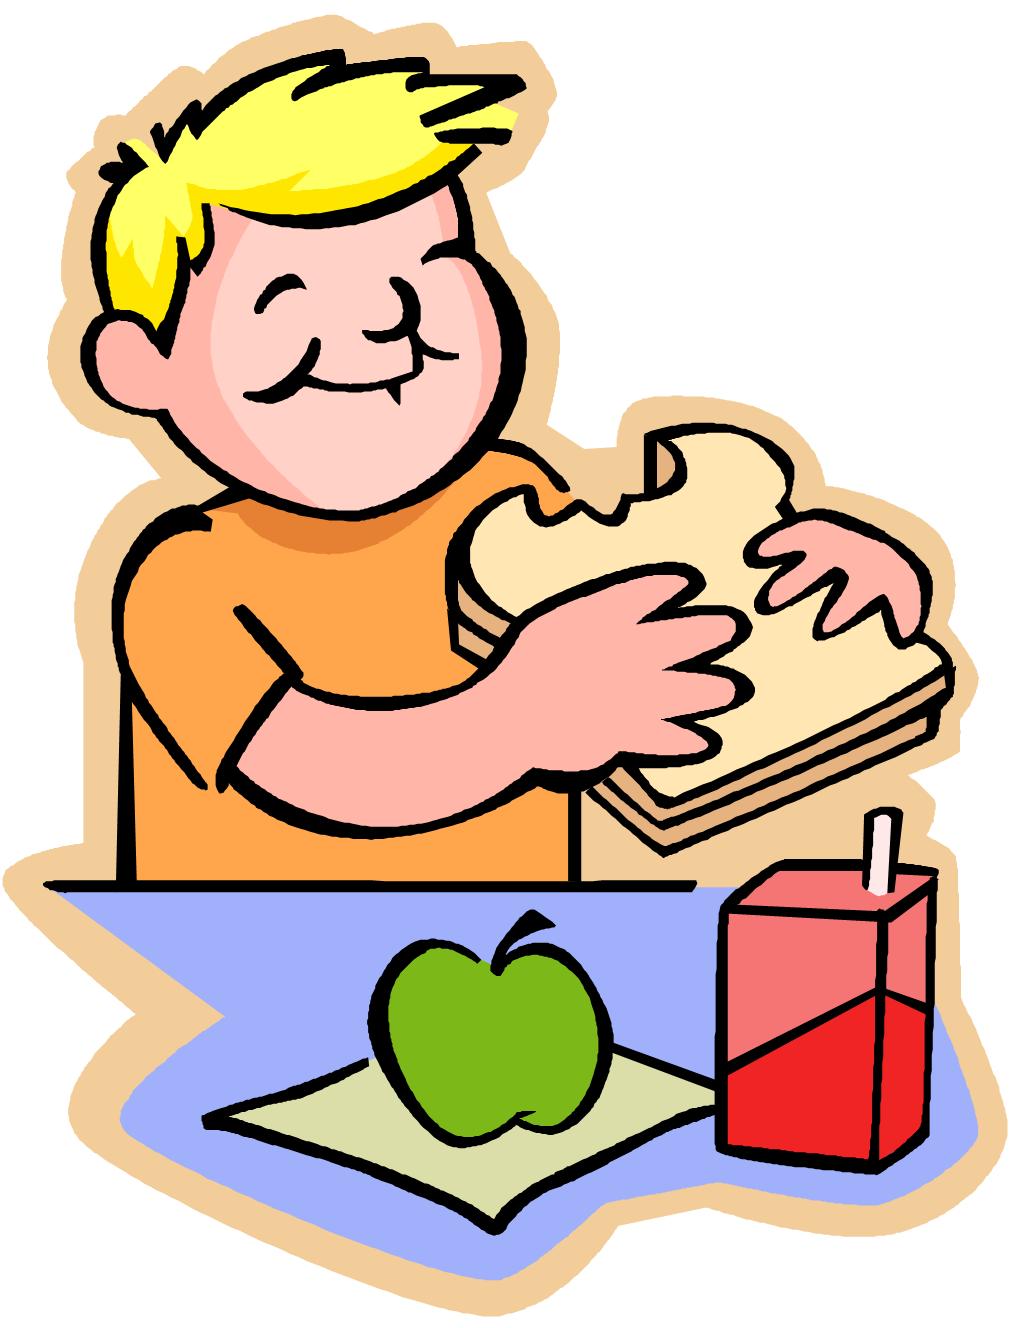 Eat breakfast clipart new hd template images